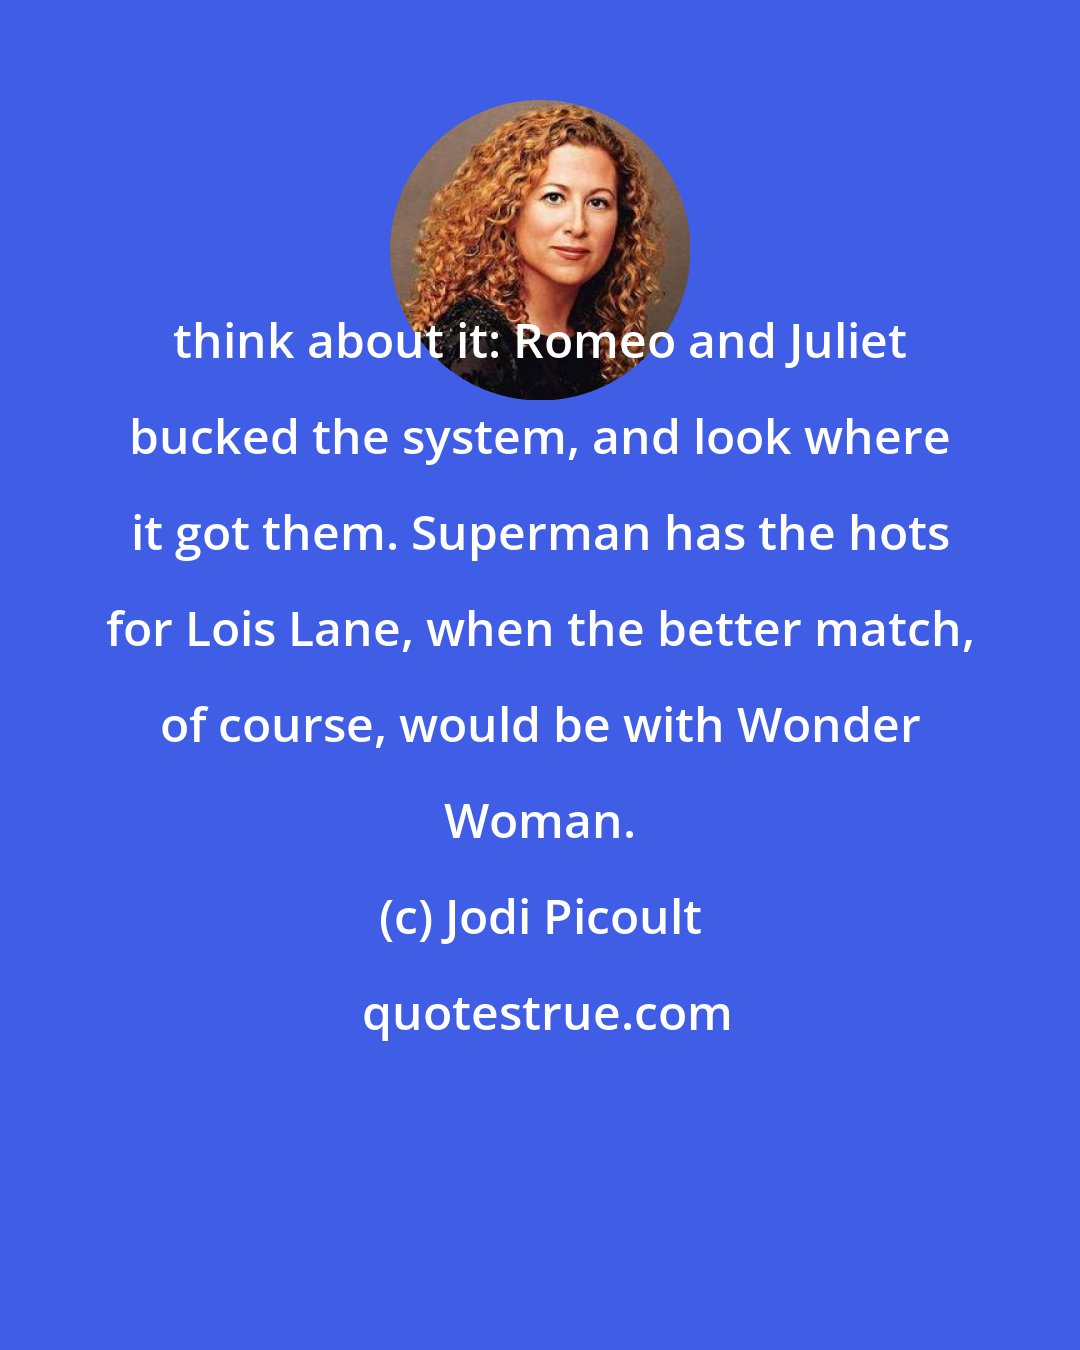 Jodi Picoult: think about it: Romeo and Juliet bucked the system, and look where it got them. Superman has the hots for Lois Lane, when the better match, of course, would be with Wonder Woman.